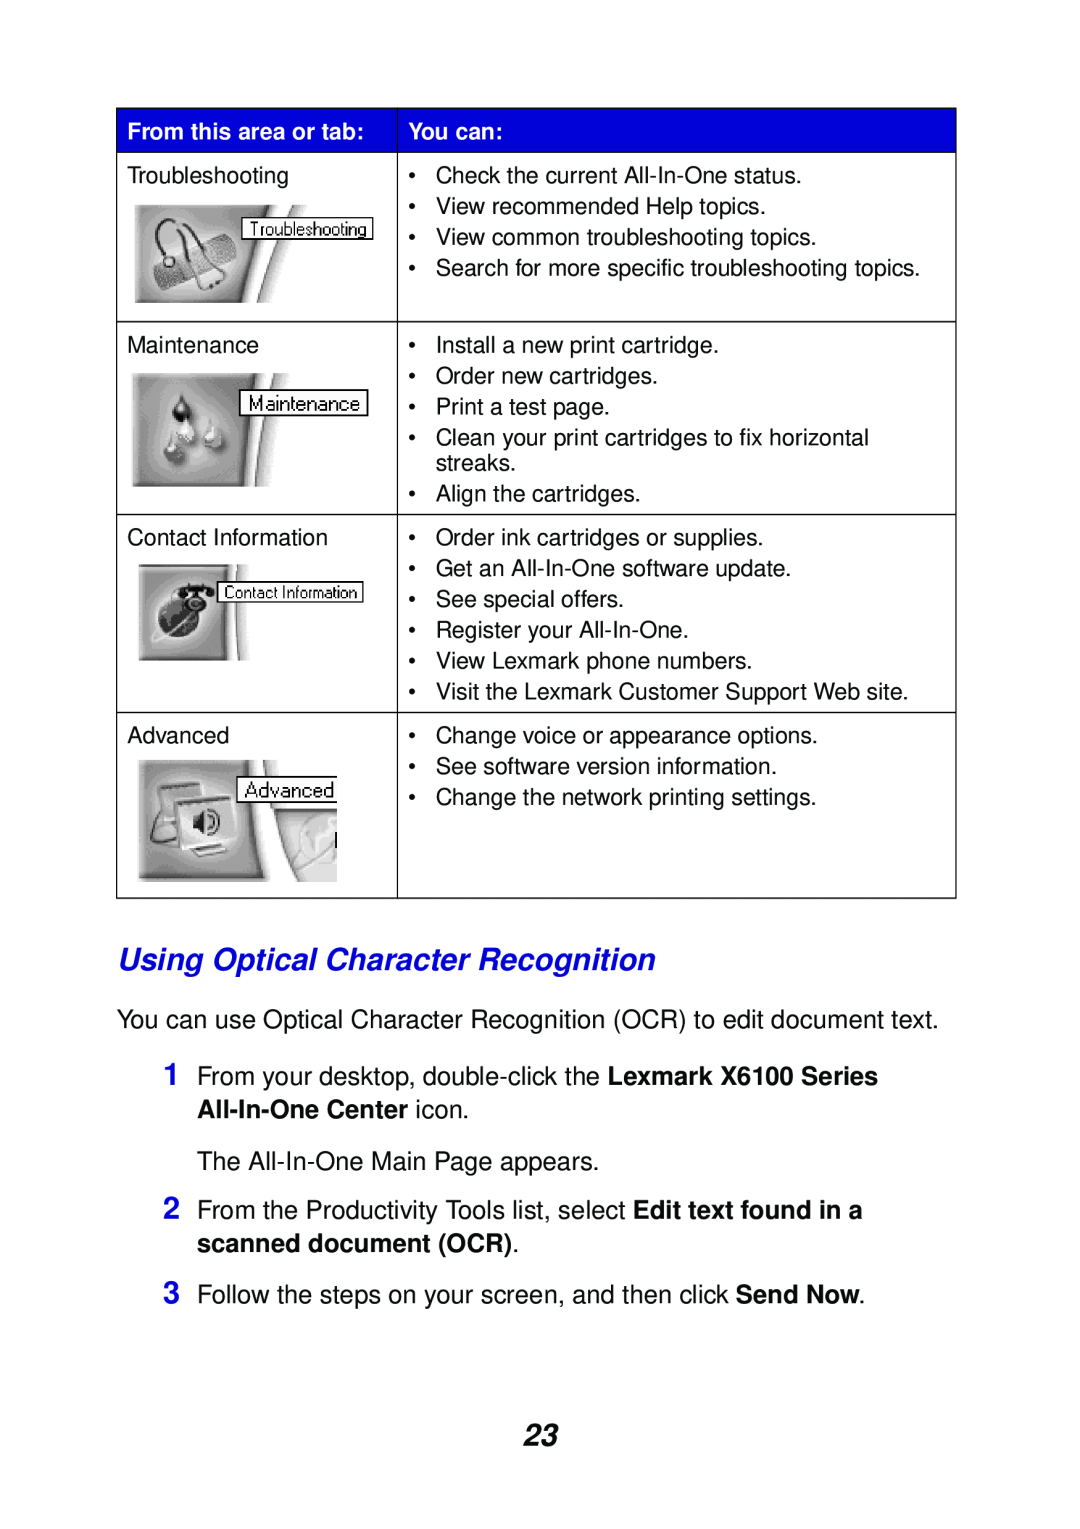 Lexmark X6100 manual Using Optical Character Recognition 